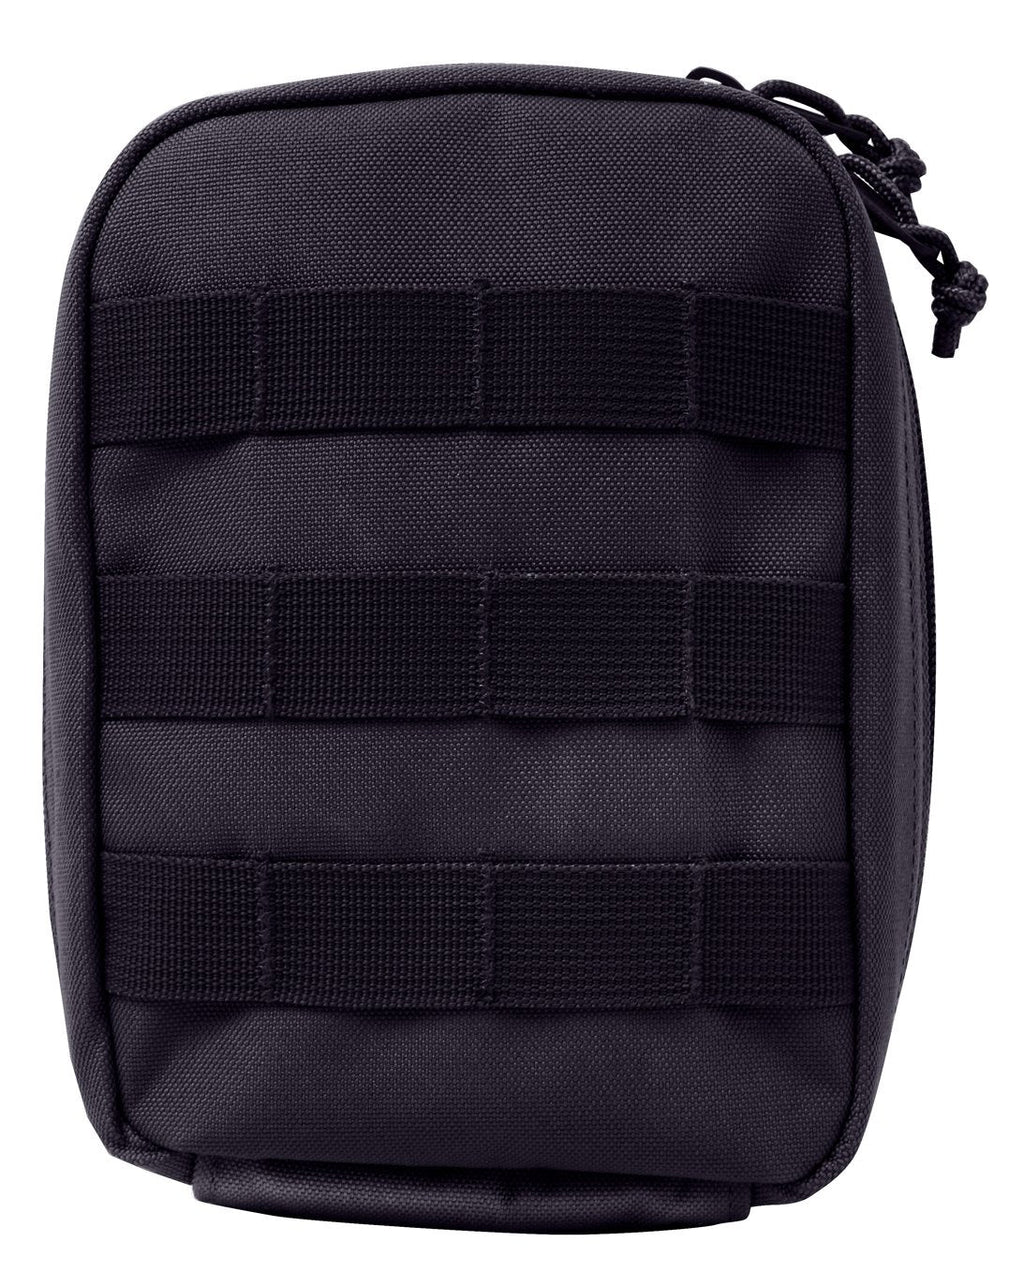  [AUSTRALIA] - Rothco Molle Tactical First Aid Kit Black